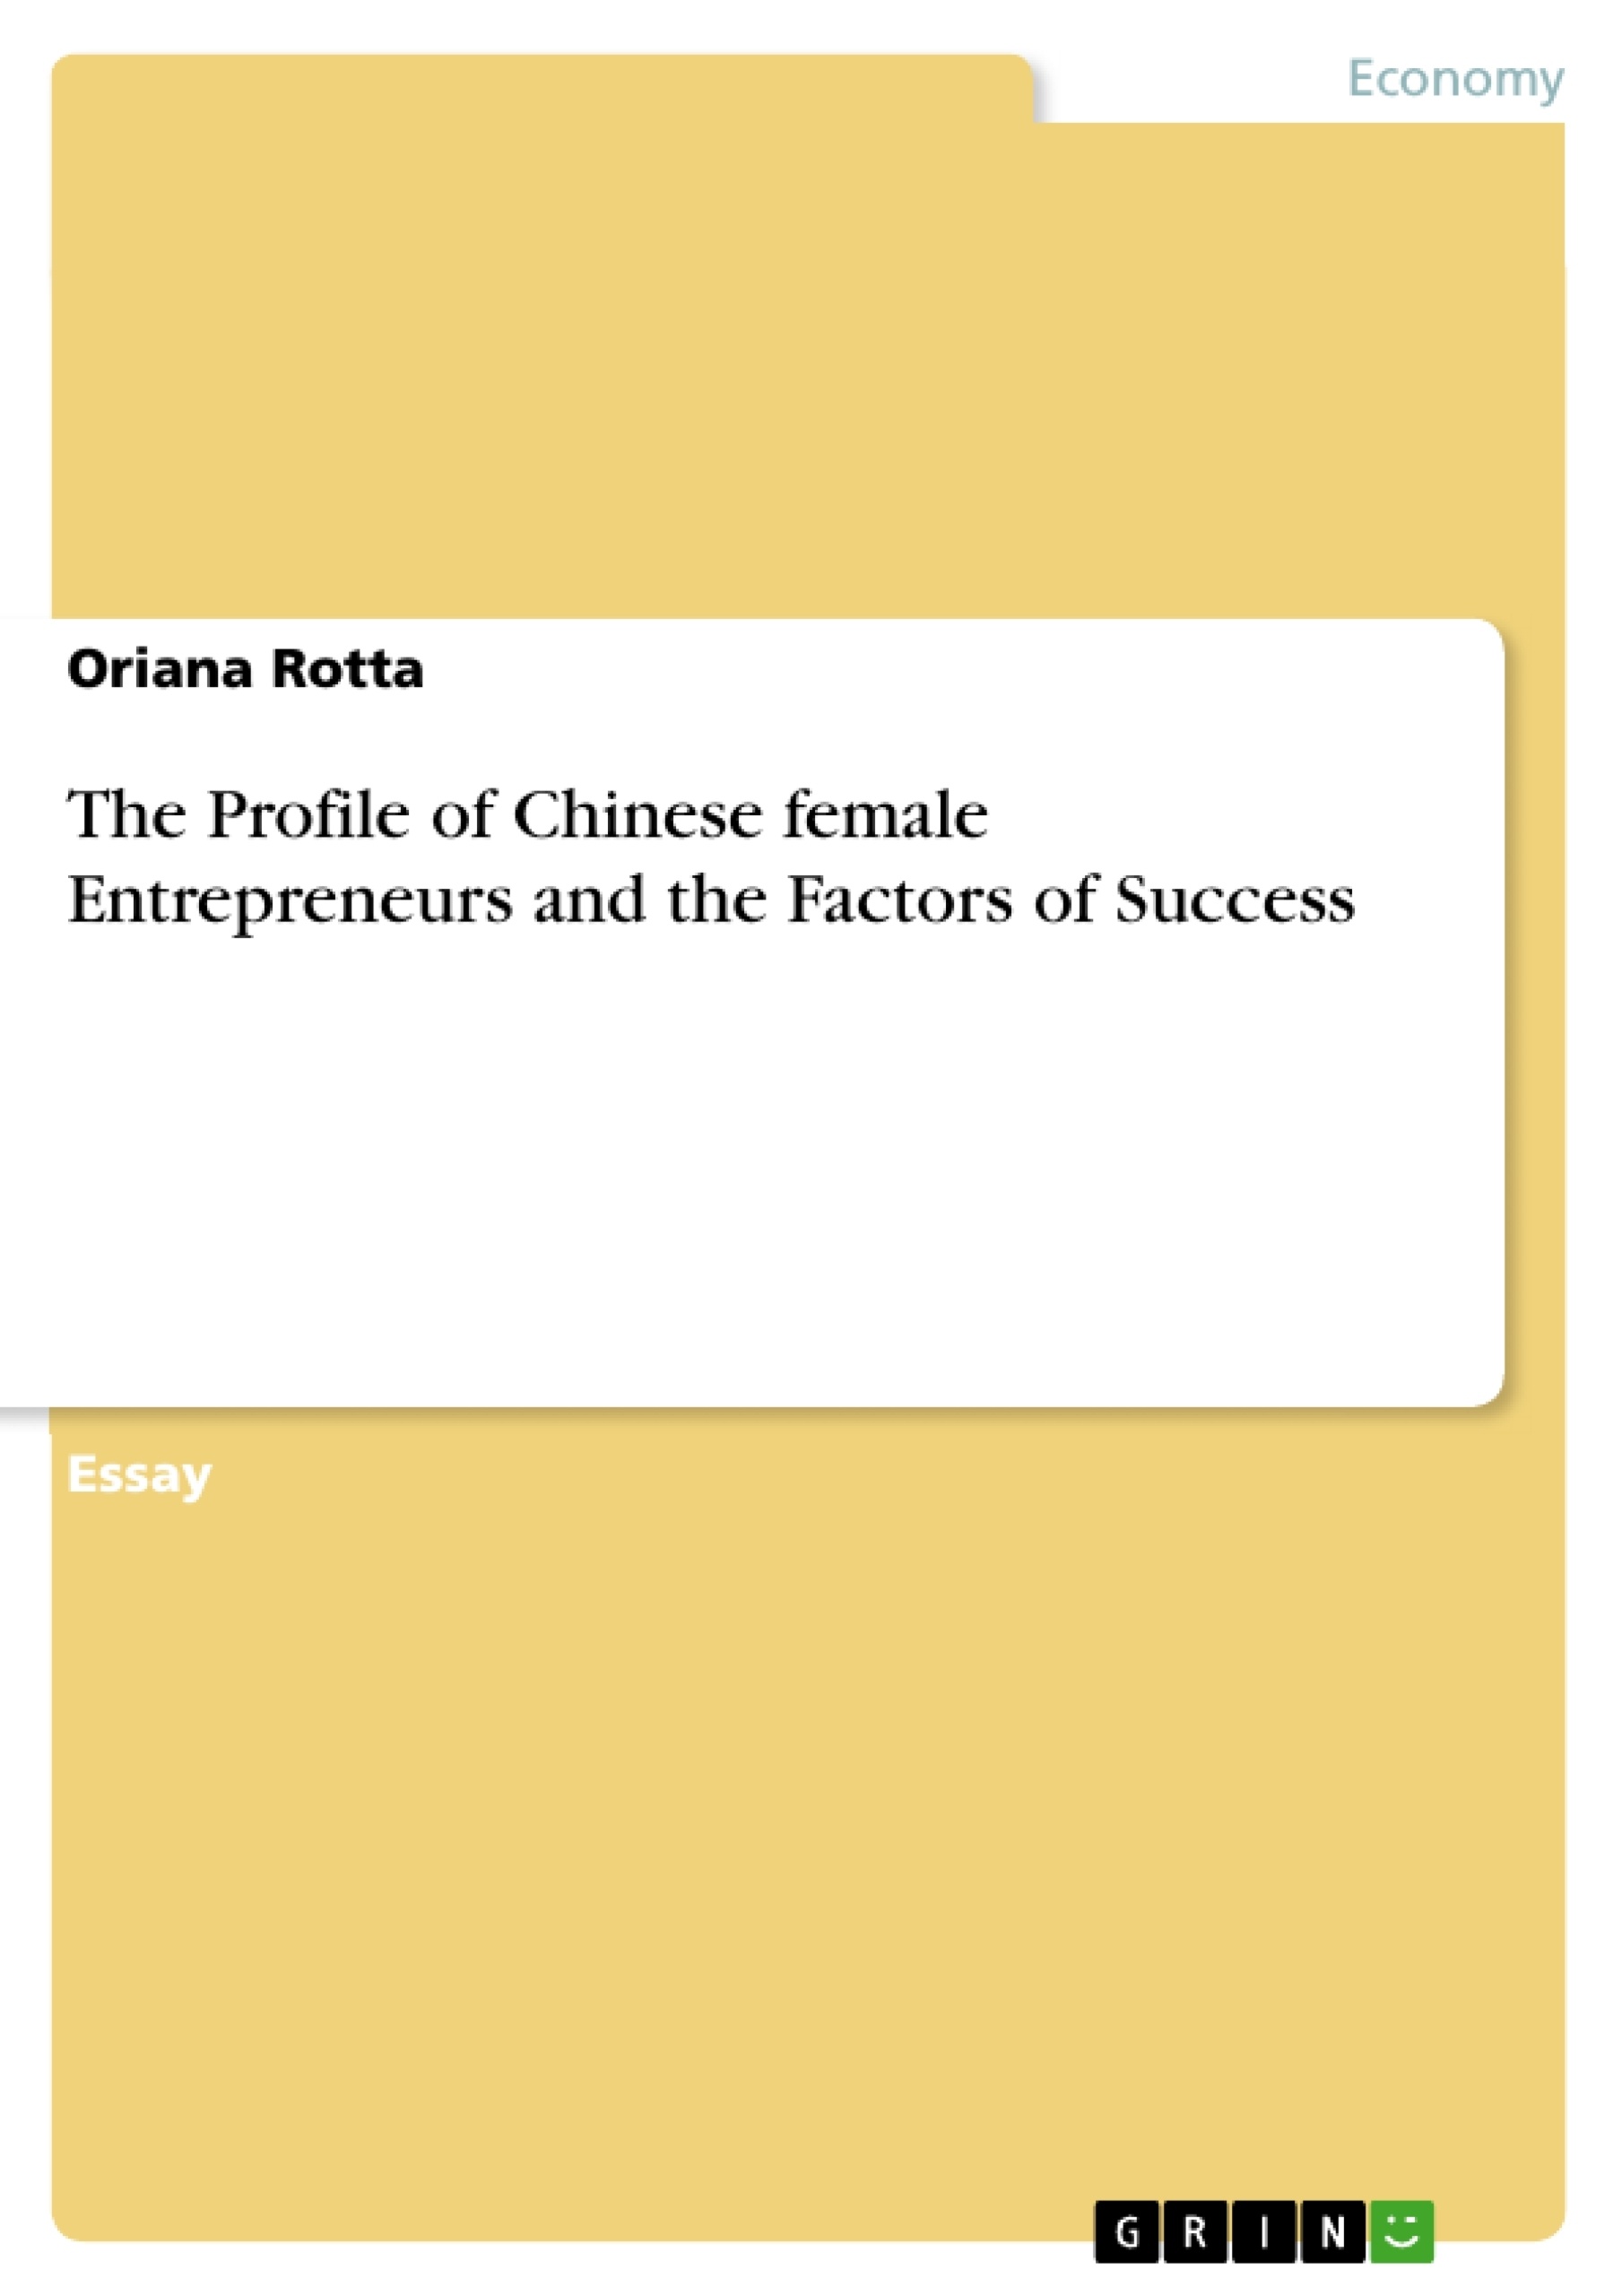 Title: The Profile of Chinese female Entrepreneurs and the Factors of Success